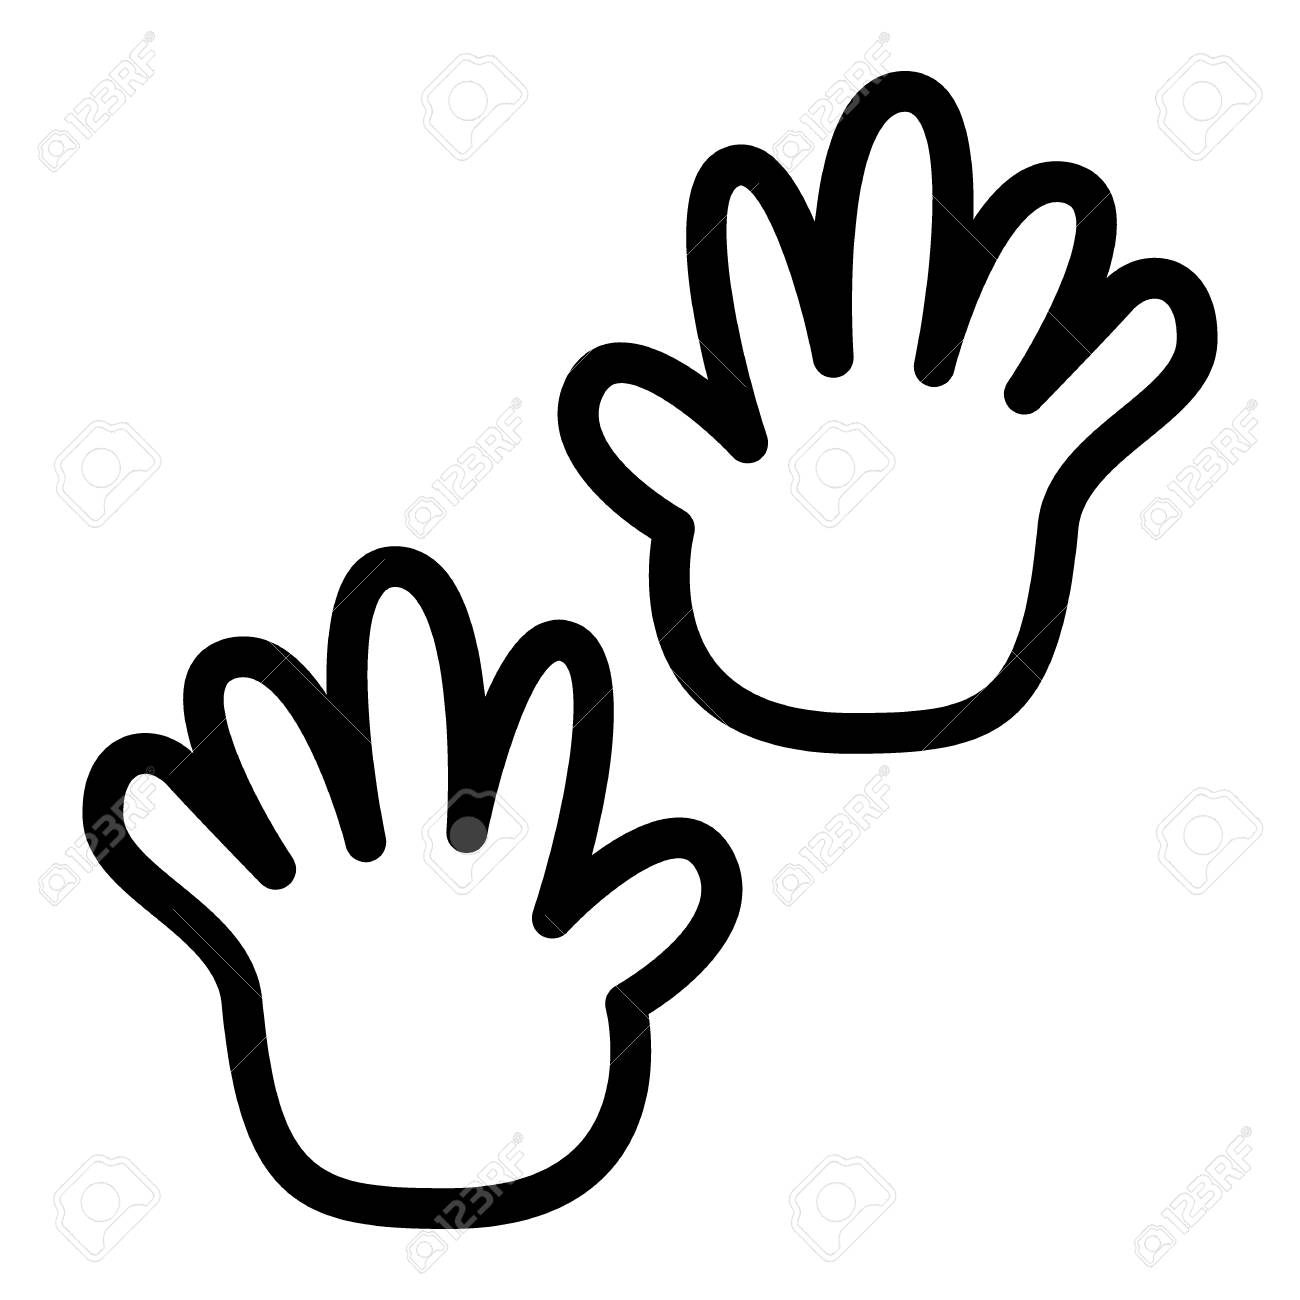 Baby hands line icon. Baby hand prints vector illustration isolated...